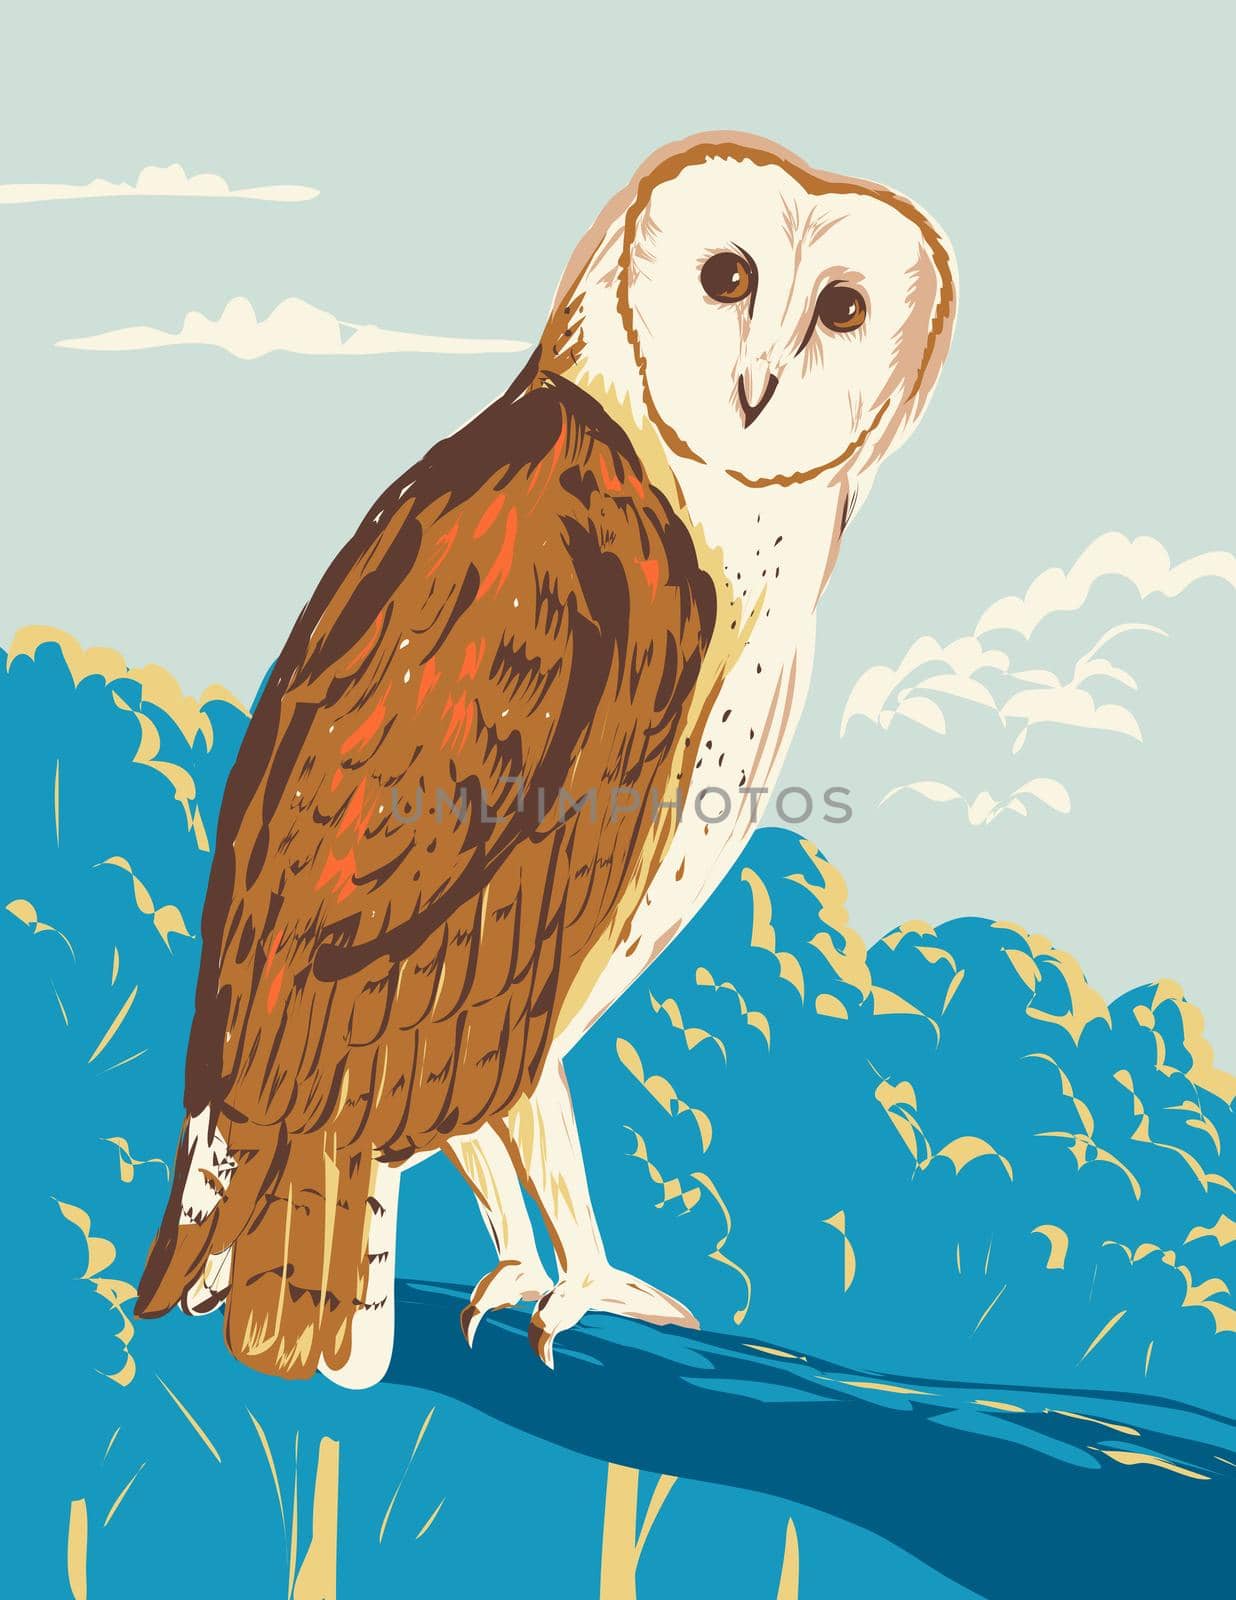 WPA poster art of the American barn owl or Tyto Furcata perching on branch done in works project administration or federal art project style.

